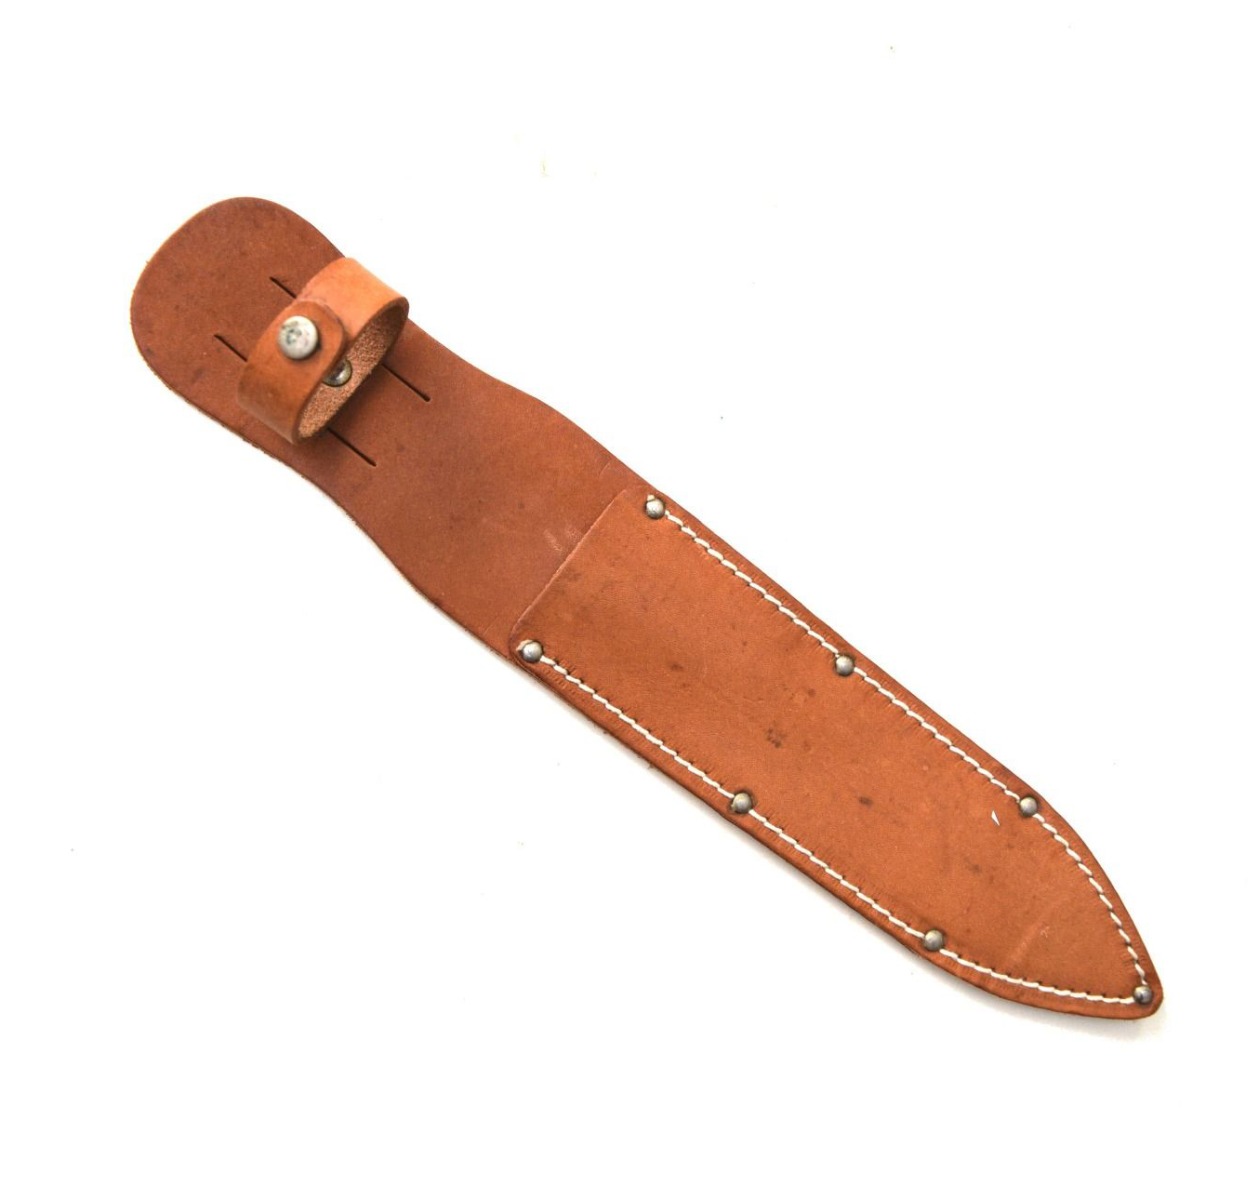 AMERICAN DOUBLE EDGE BLADE LEATHER SHEATH 7 INCHES